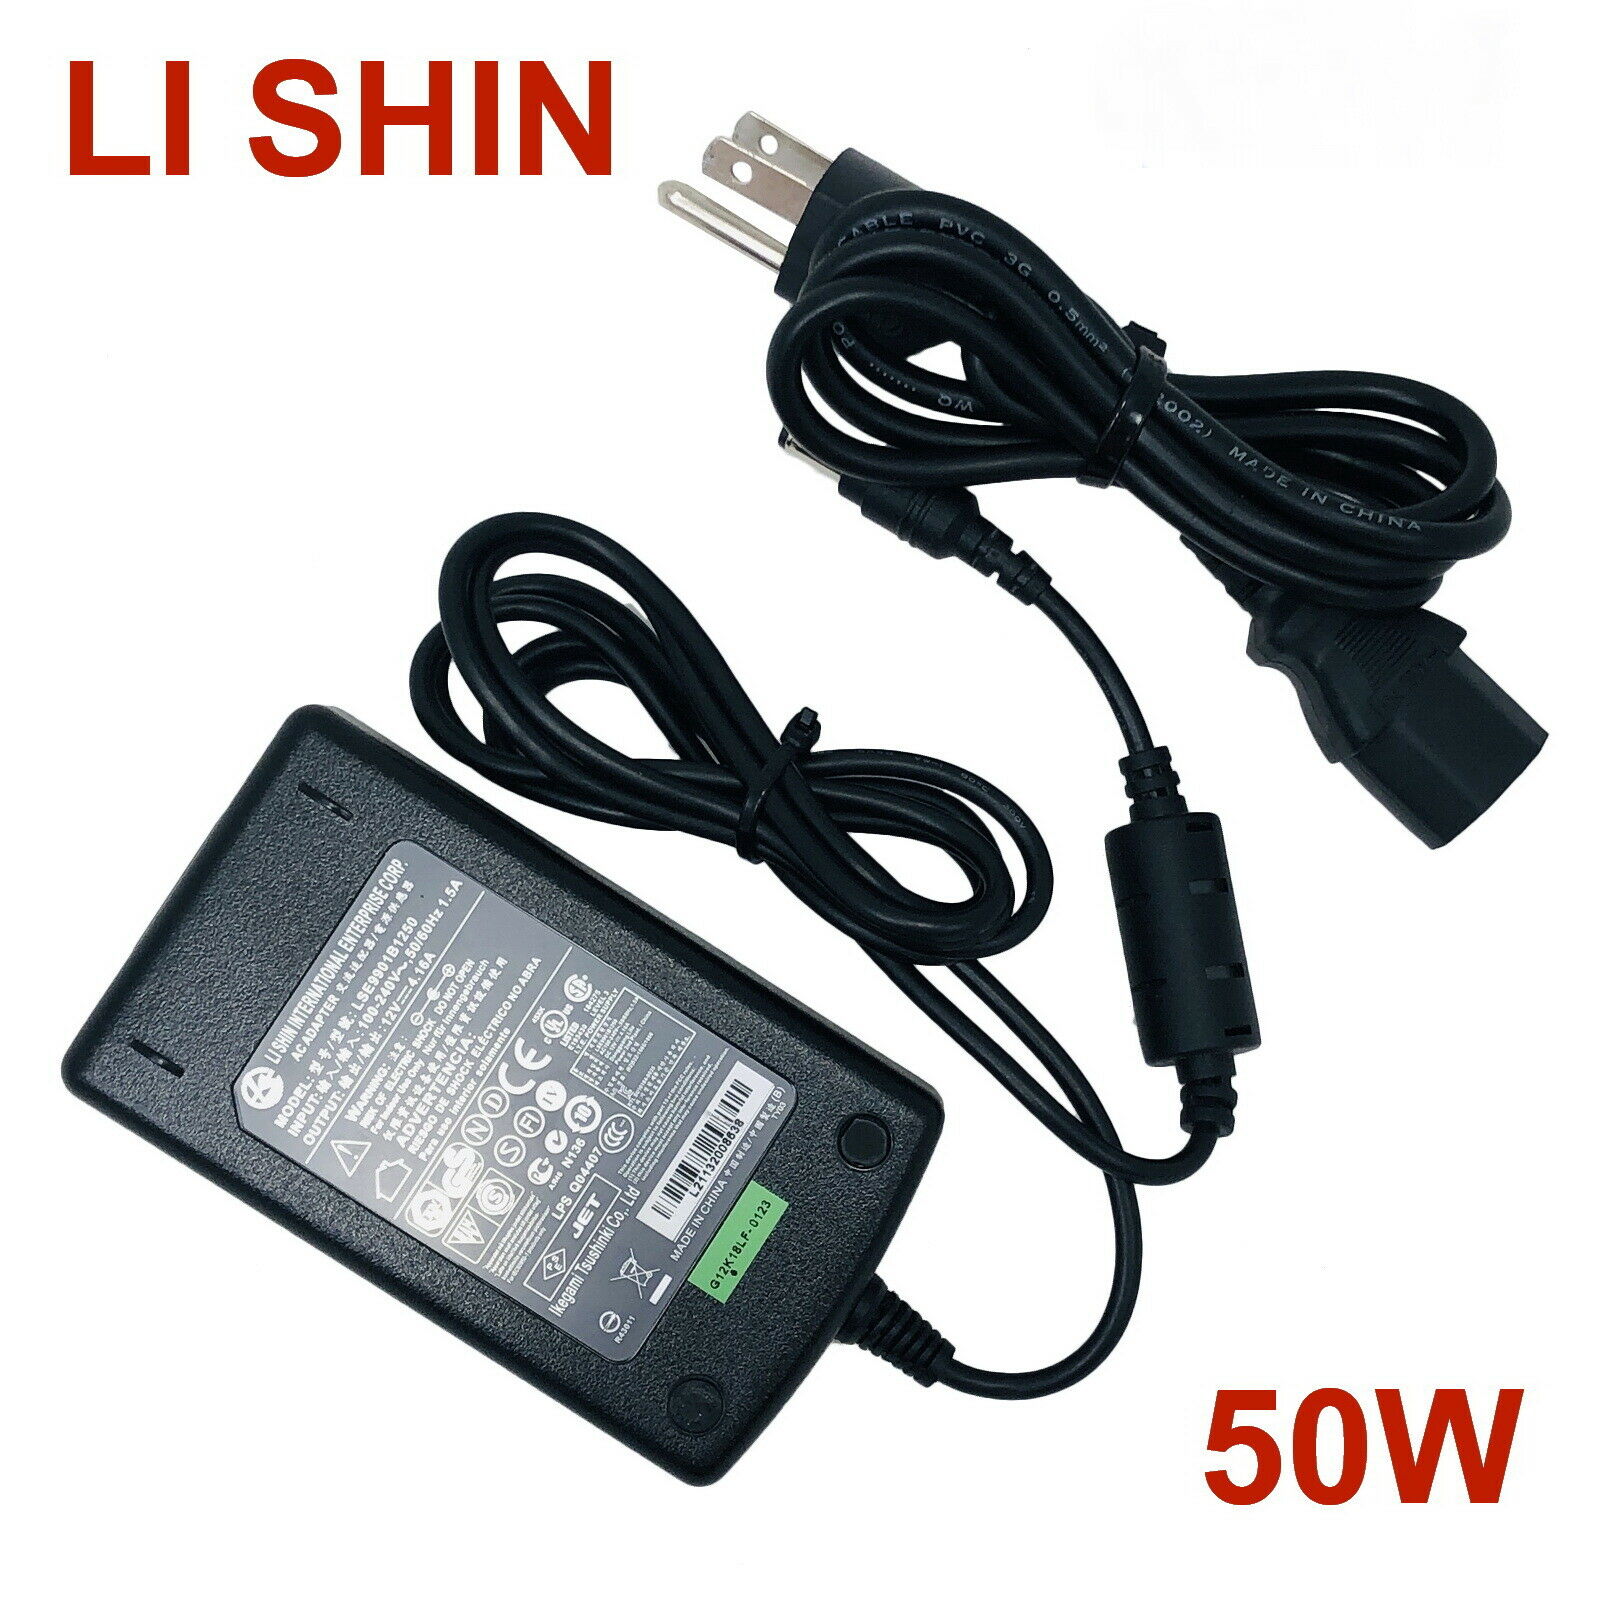 Genuine LI SHIN LSE9901B1250 AC Adapter Power Supply 12V 4.16A 50W W/Cord Compatible Brand: Universal Output Voltage(s